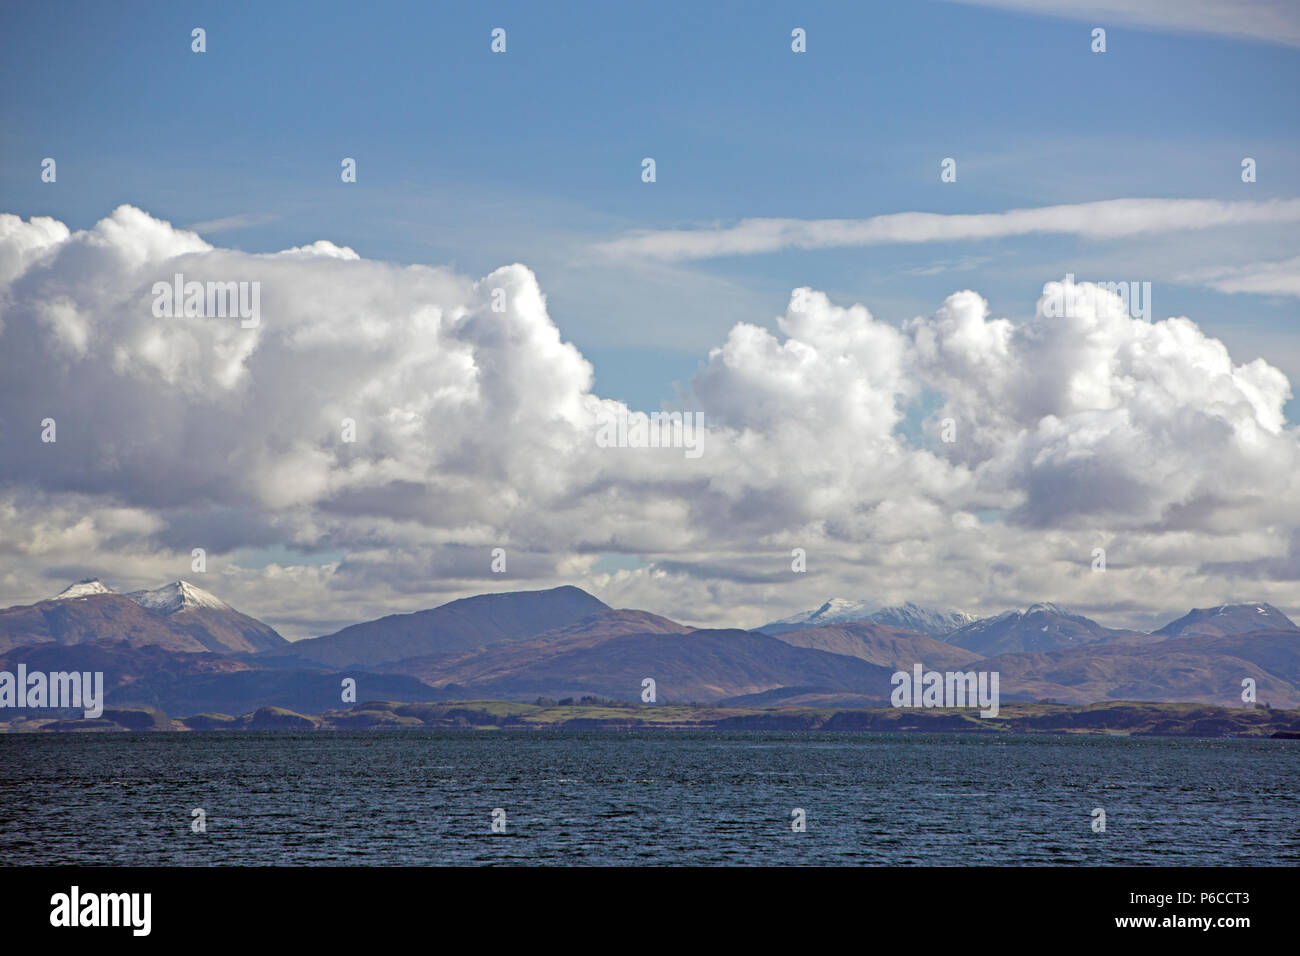 Snow on the summits of Sgorr Dhearg and Sgorr Dhonuill viewed across Loch Linnhe from an Oban - Mull ferry, Argyll and Bute, Scotland, UK Stock Photo